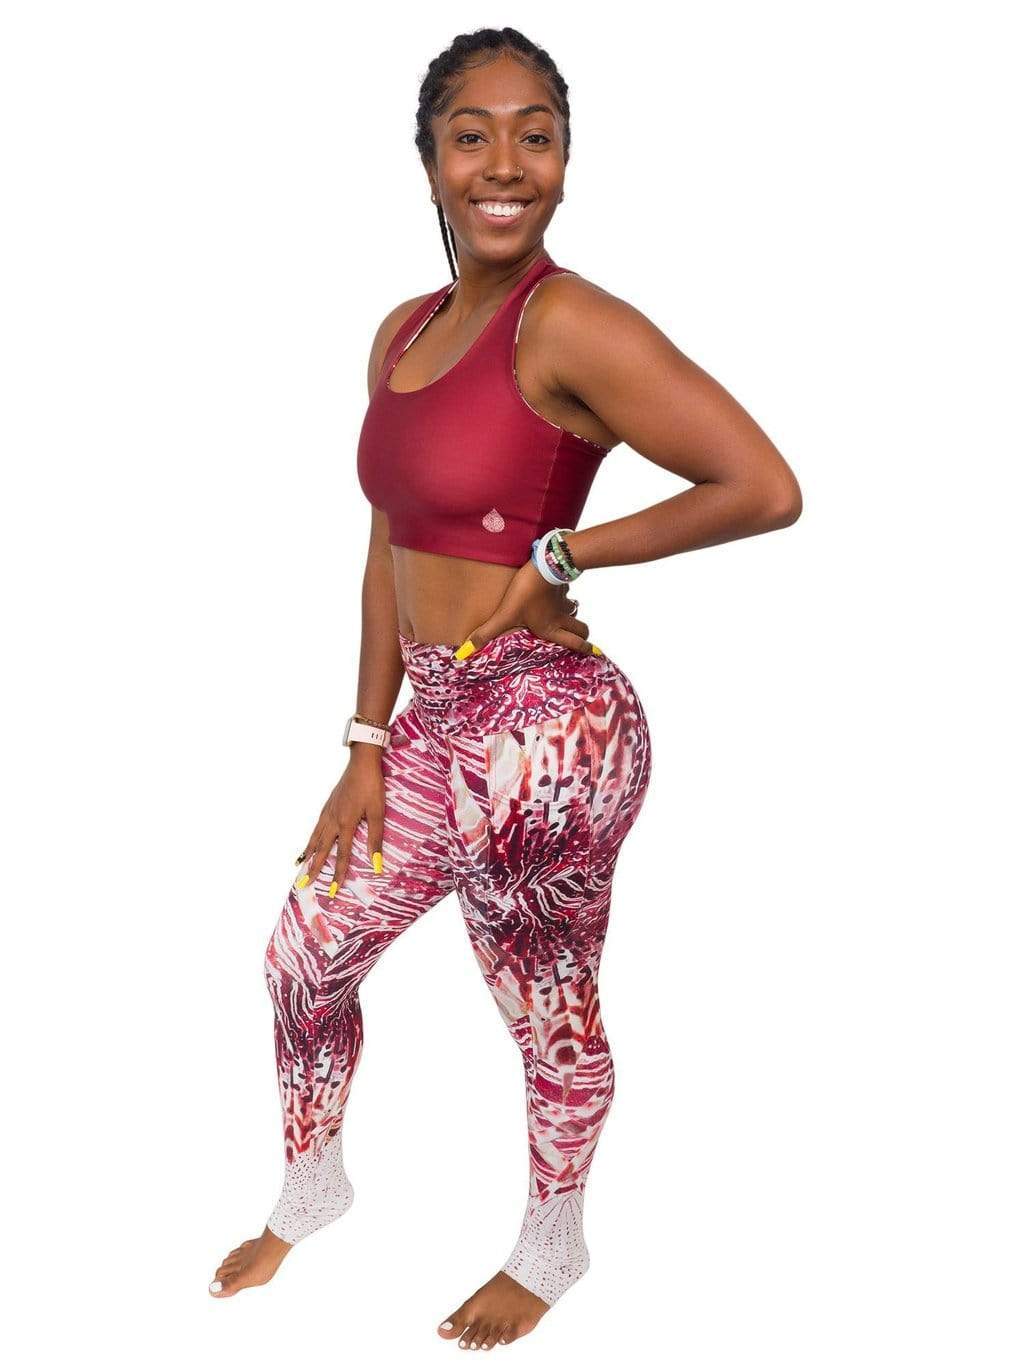 Model: Carlee is a shark &amp; sea turtle scientist and co-founder of Minorities in Shark Sciences. She is 5&#39;7&quot;, 145 lbs, 36C and is wearing a M legging and S top.